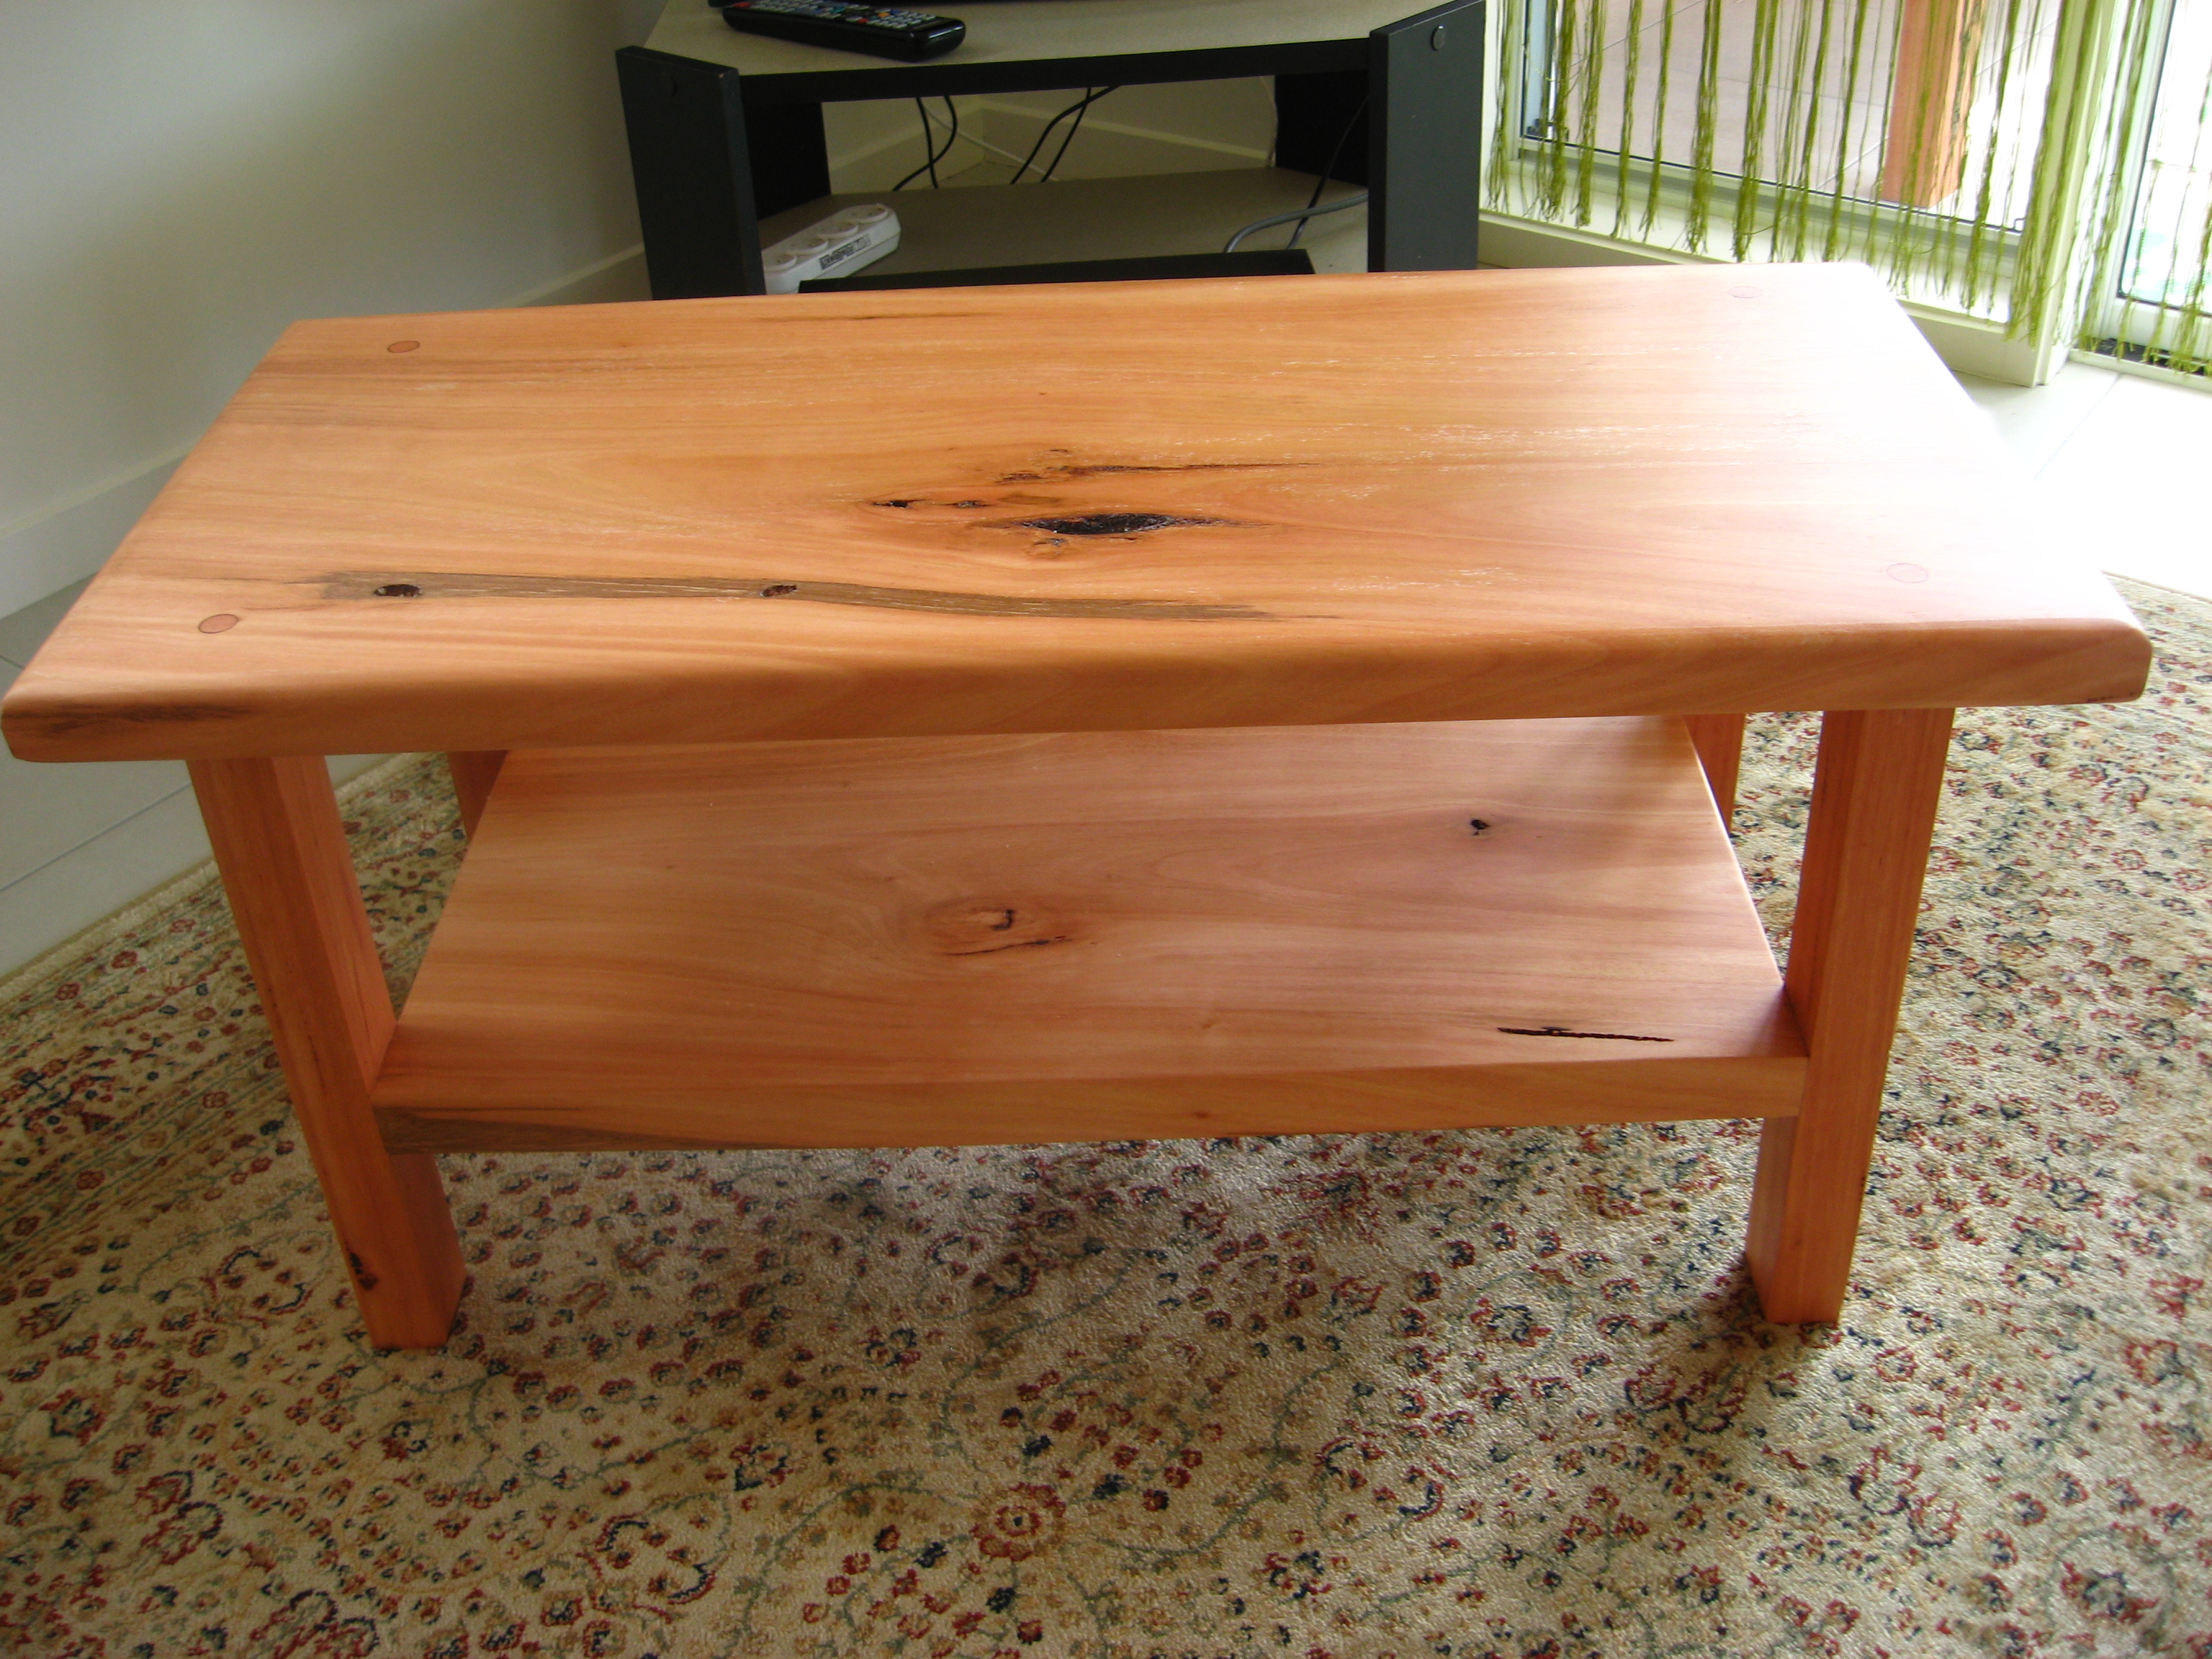 wooden coffee table design ideas photo - 4